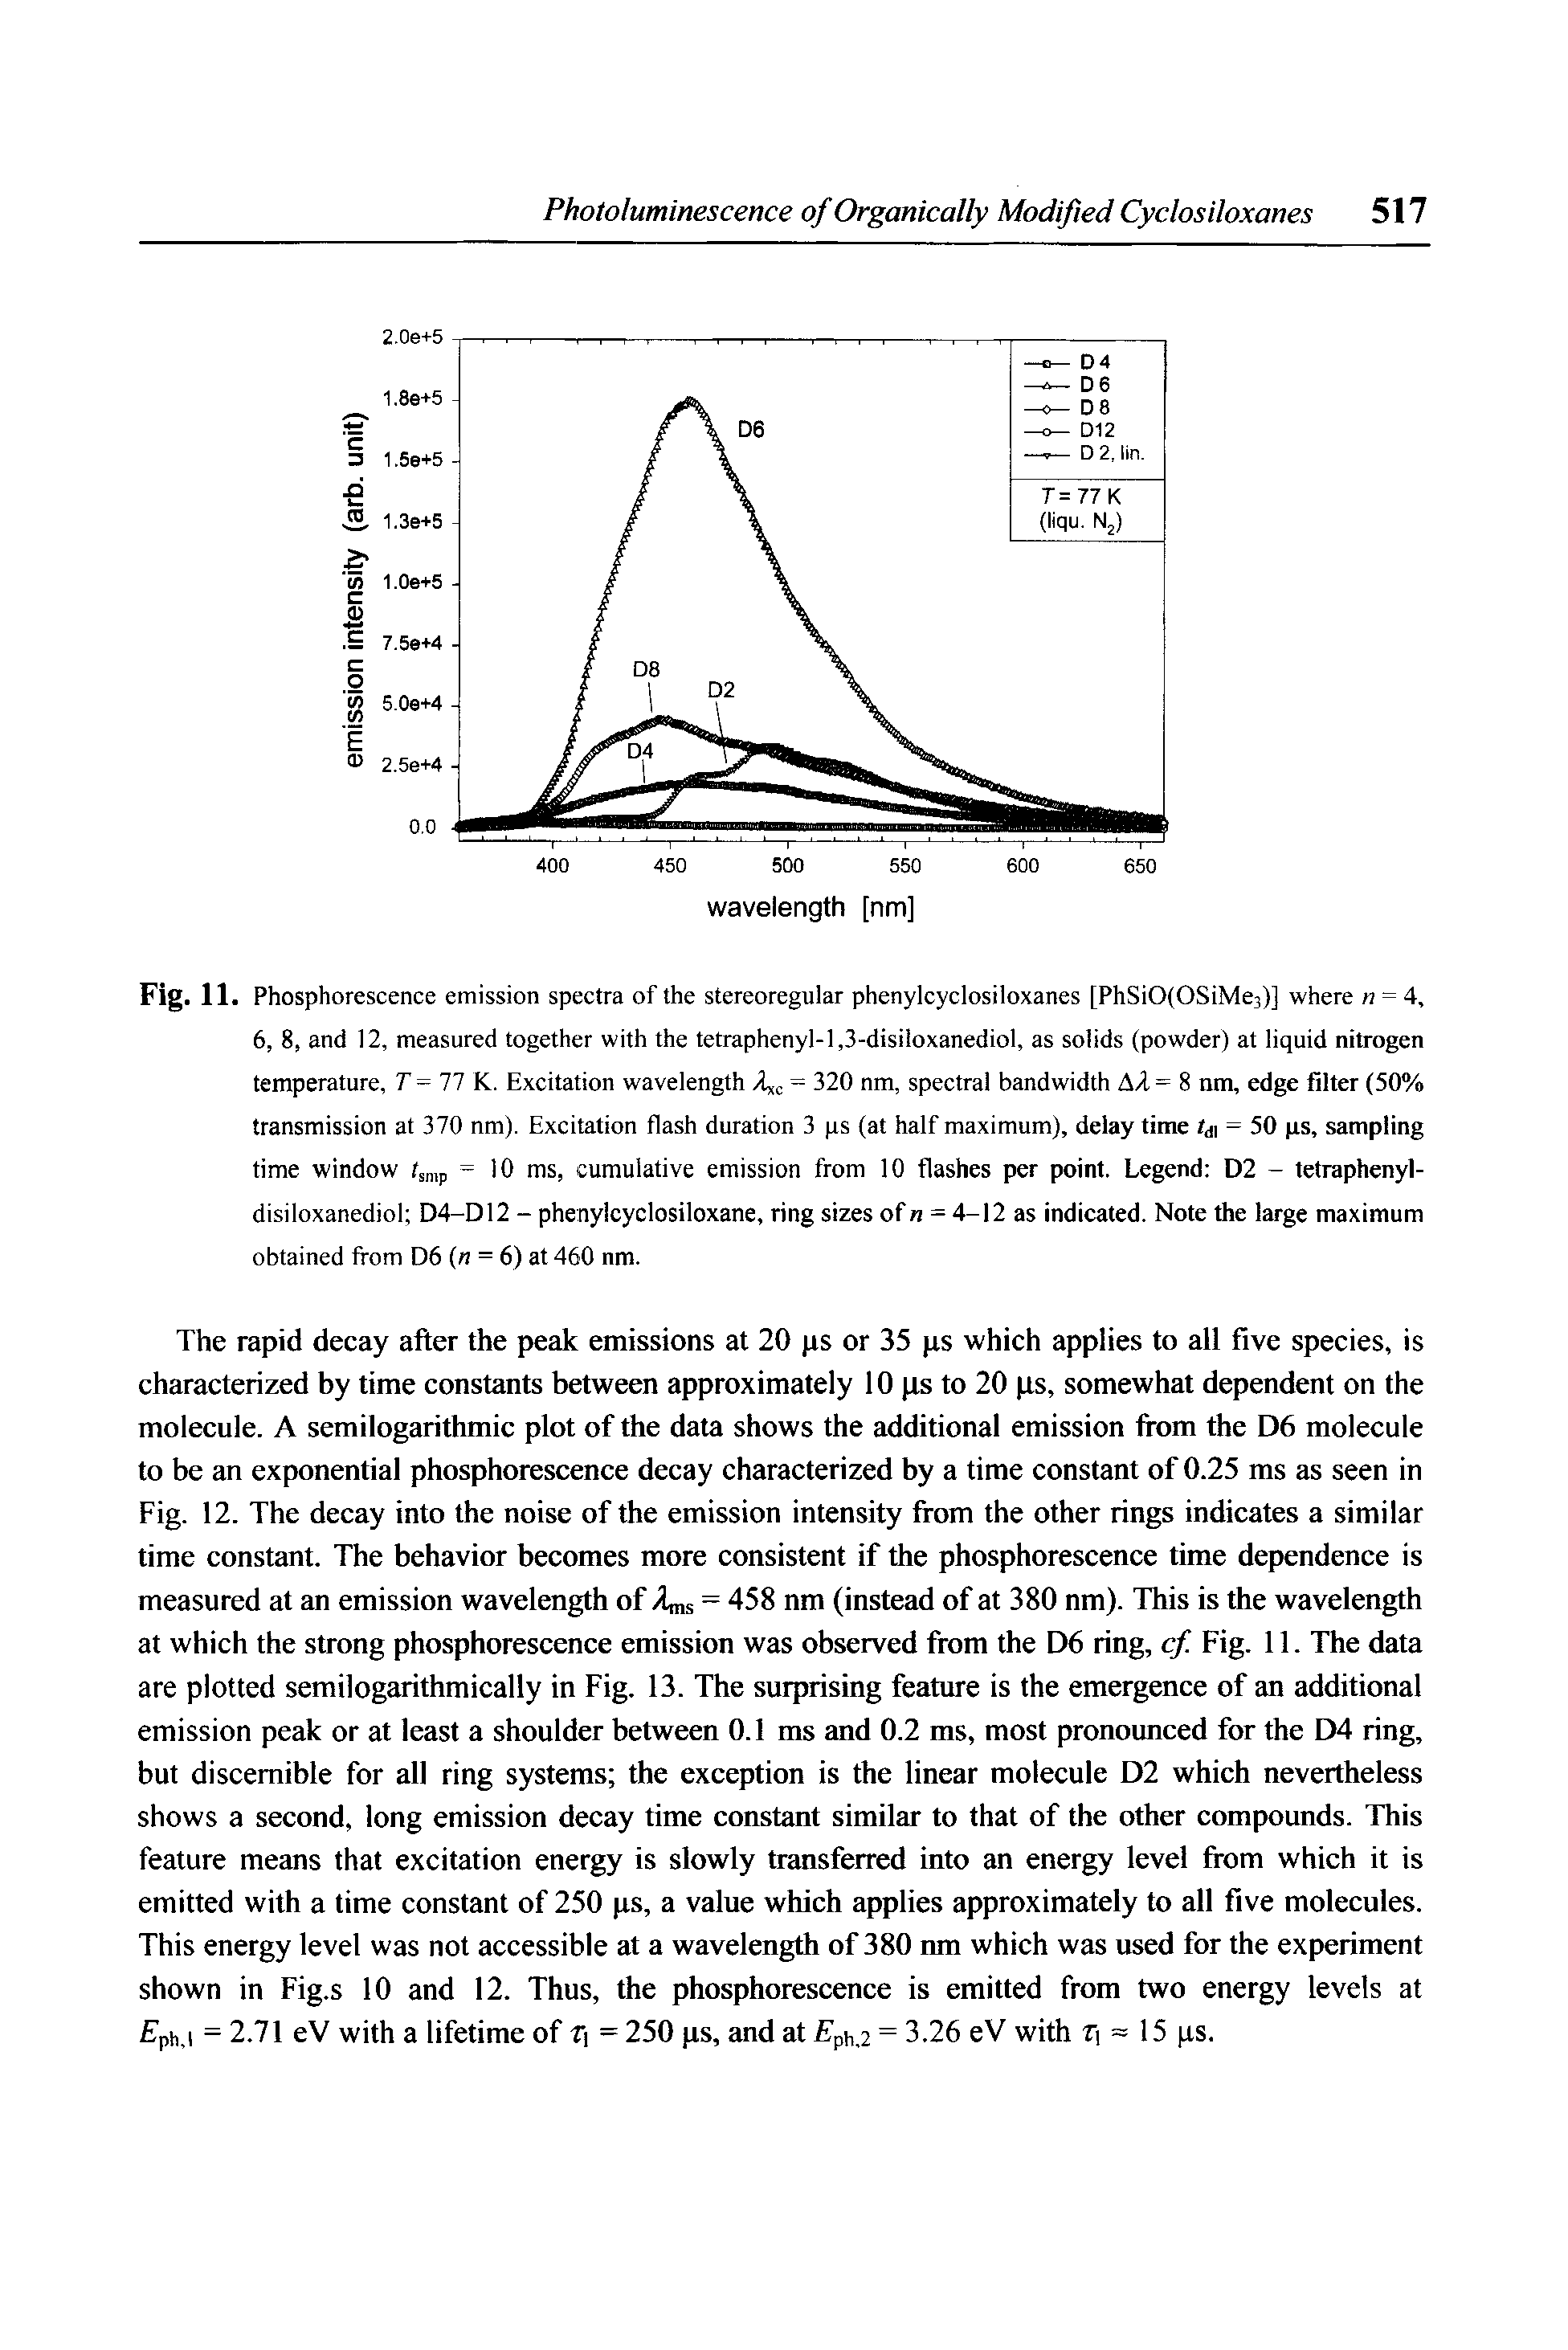 Fig. 11. Phosphorescence emission spectra of the stereoregular phenylcyclosiloxanes [PhSiO(OSiMe3)] where n = 4, 6, 8, and 12, measured together with the tetraphenyl-l,3-disiloxanediol, as solids (powder) at liquid nitrogen temperature, 7" = 77 K. Excitation wavelength = 320 nm, spectral bandwidth A/l= 8 ntn, edge filter (50% transmission at 370 nm). Excitation flash duration 3 ps (at half maximum), delay time /ji = 30 ps, sampling time window fsmp = 10 ms, cumulative emission from 10 flashes per point. Legend D2 - tetiaphenyl-disiloxanediol D4-D12 - phenylcyclosiloxane, ring sizes of n = 4-12 as indicated. Note the large maximum obtained from D6 (n = 6) at 460 nm.